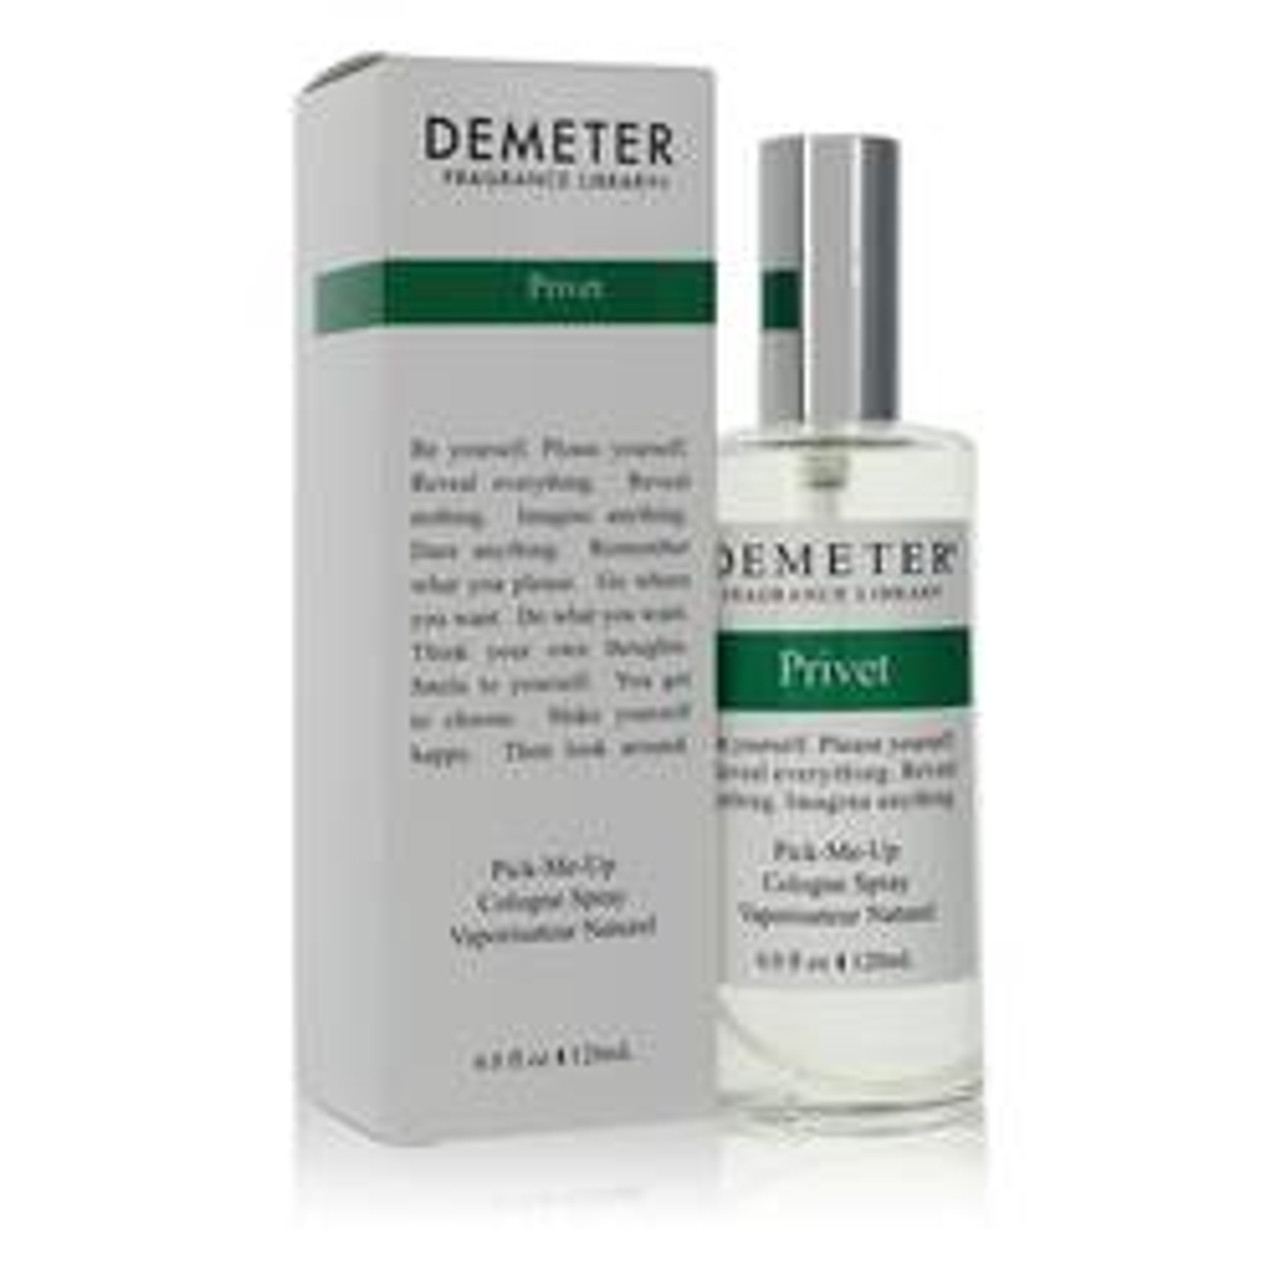 Demeter Privet Cologne By Demeter Cologne Spray (Unisex) 4 oz for Men - [From 79.50 - Choose pk Qty ] - *Ships from Miami